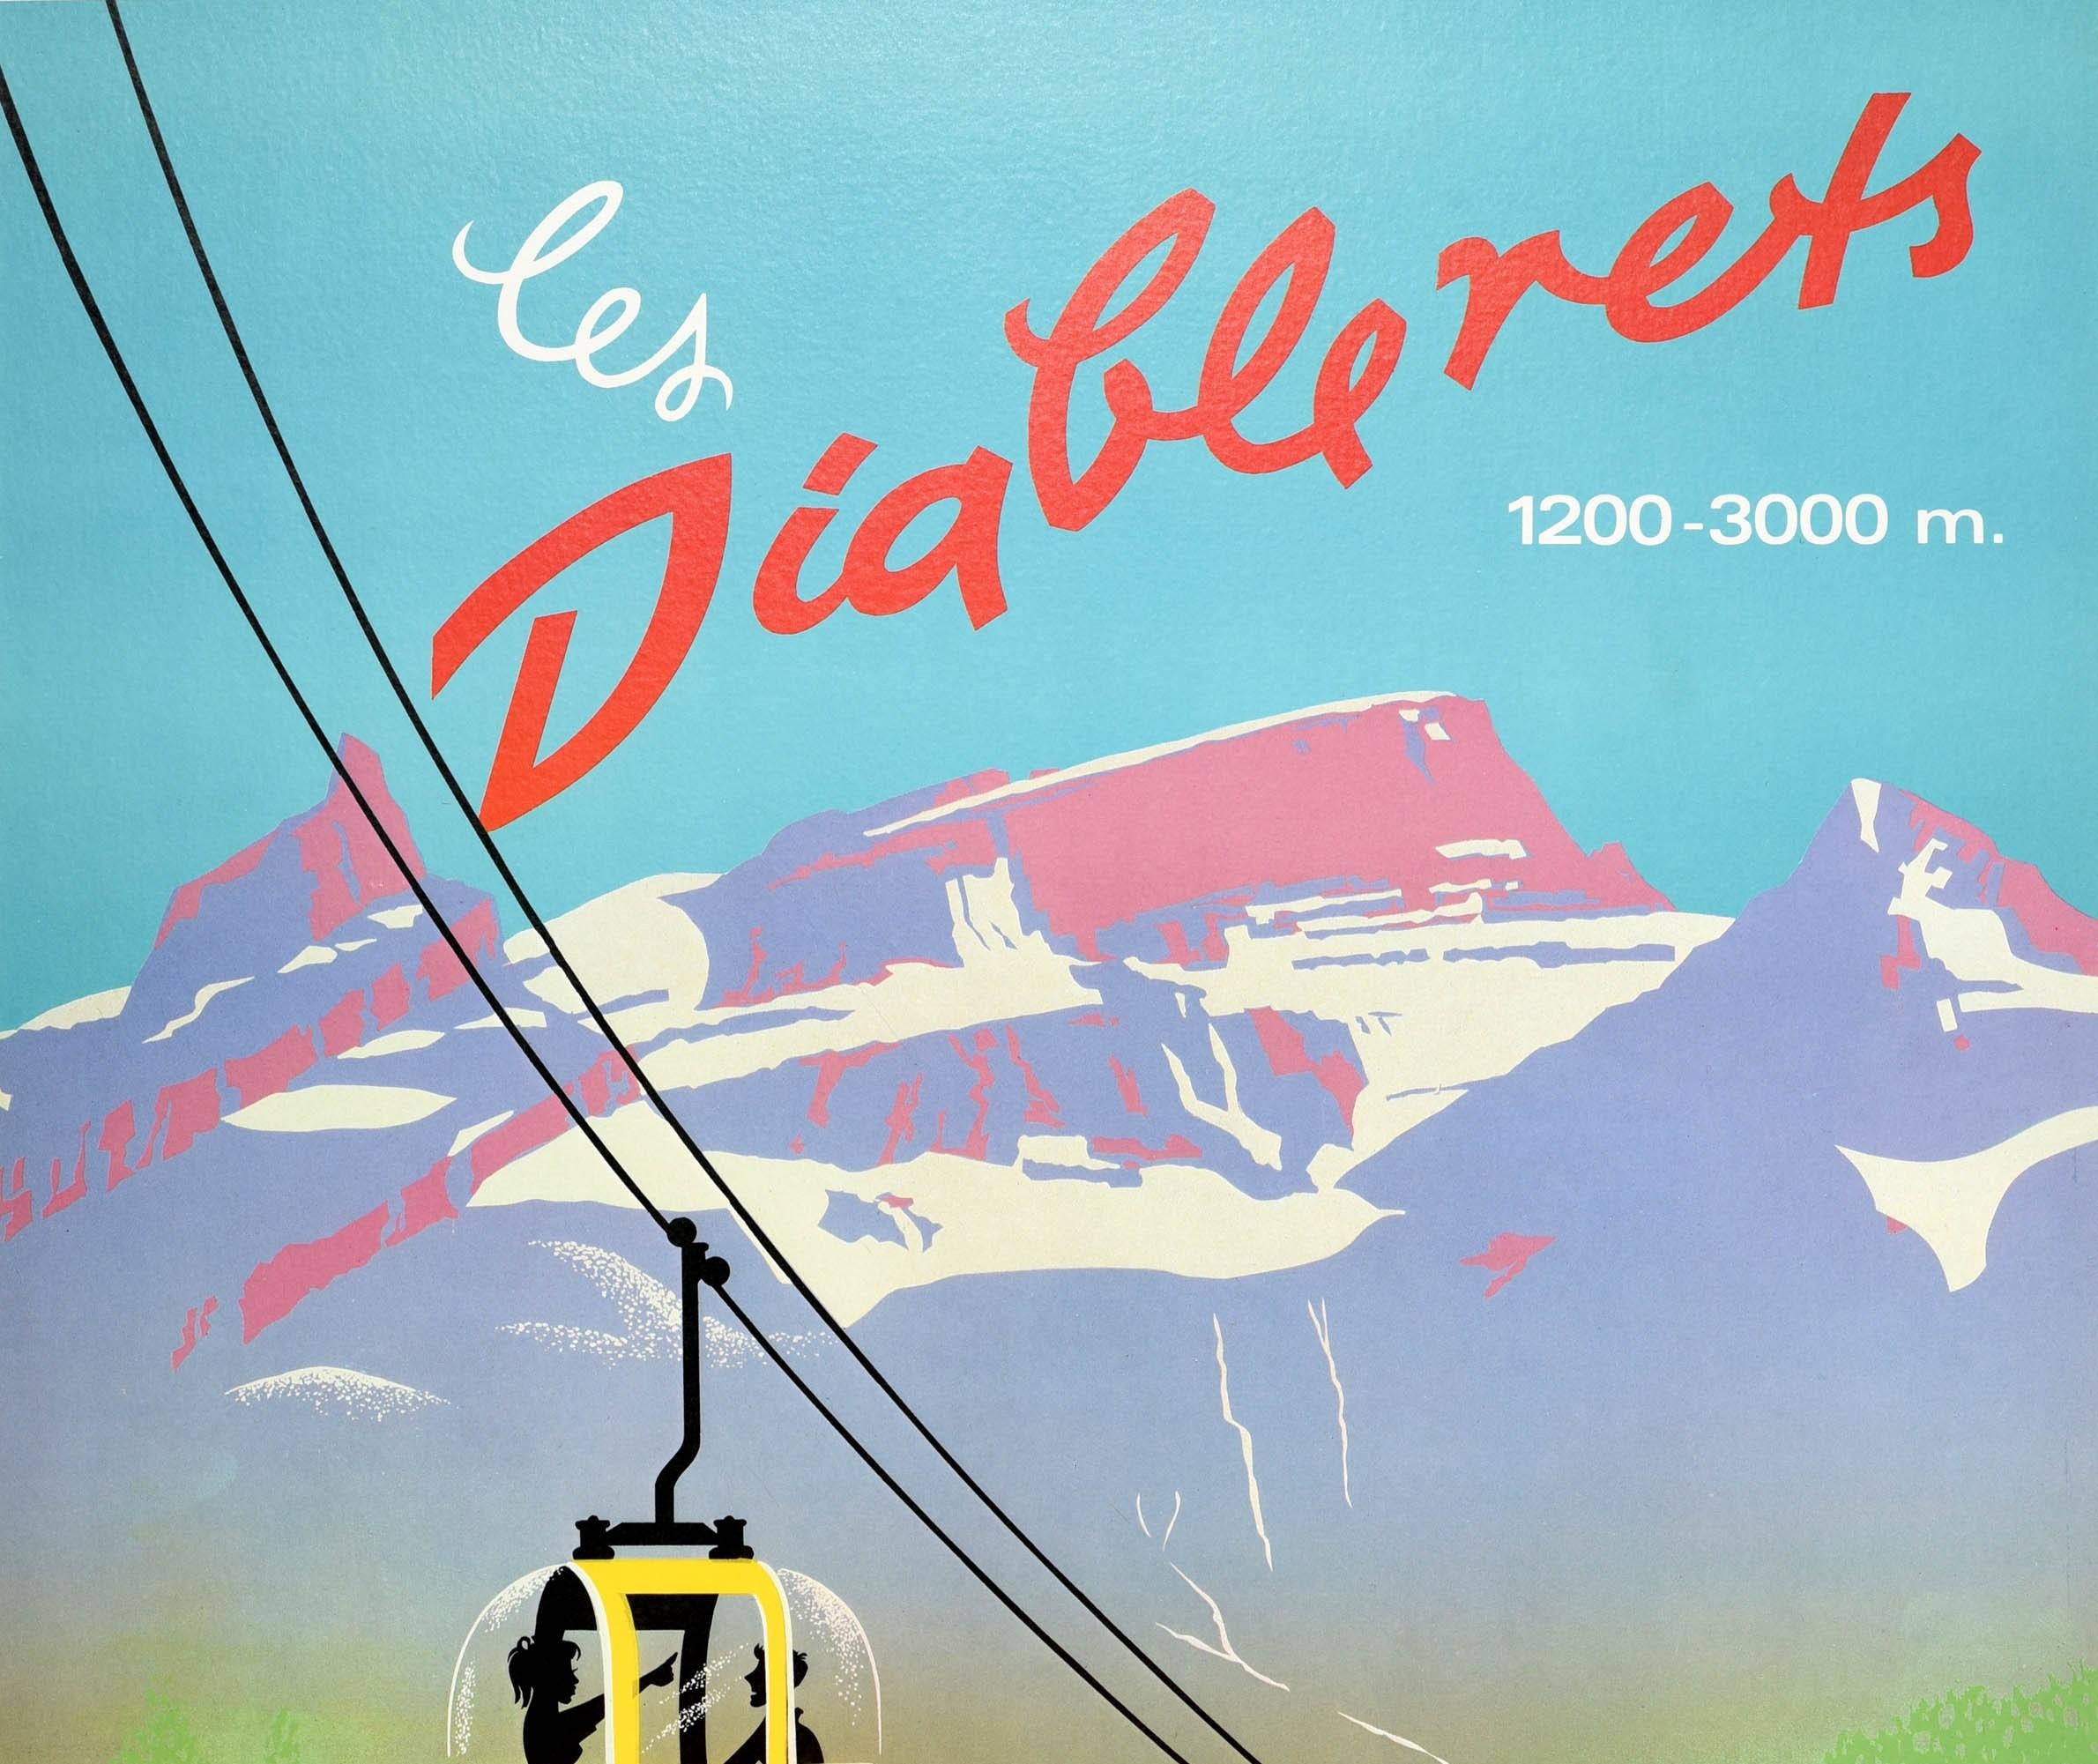 Original vintage travel poster for Les Diablerets 1200-3000m Suisse Schweiz Switzerland featuring an updated version of the 1947 poster by the Swiss poster artist Martin Peikert (1901-1975) that featured a demon child playing a flute while skipping